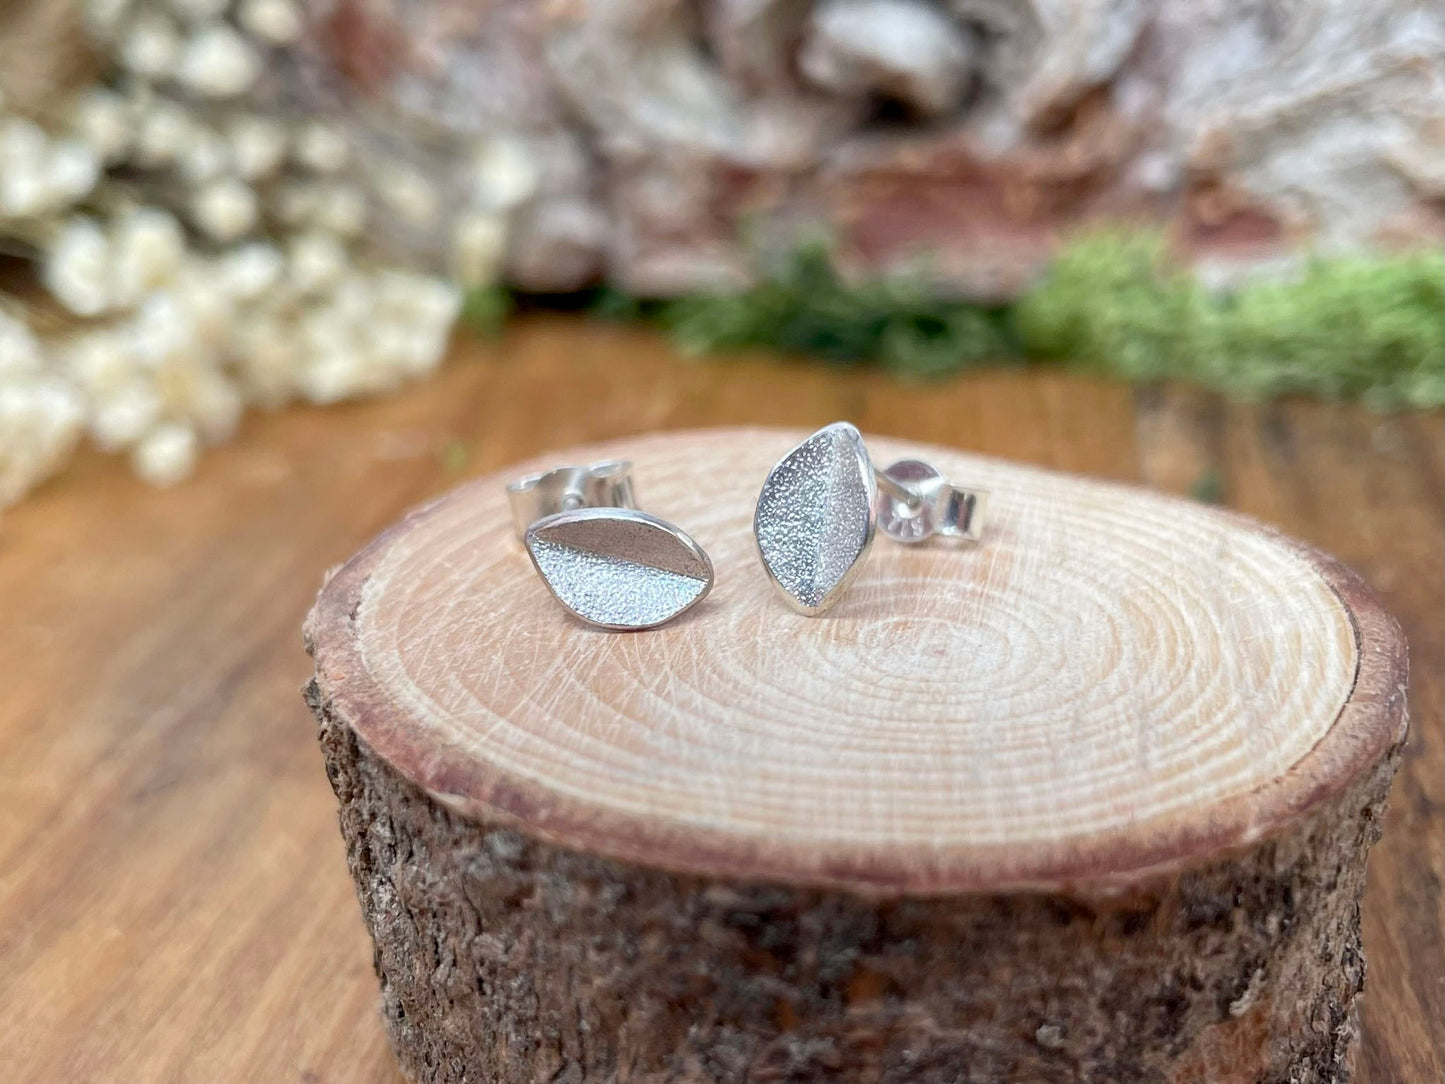 Frosted Silver Leaf Stud Earrings by Curious Magpie Jewellery